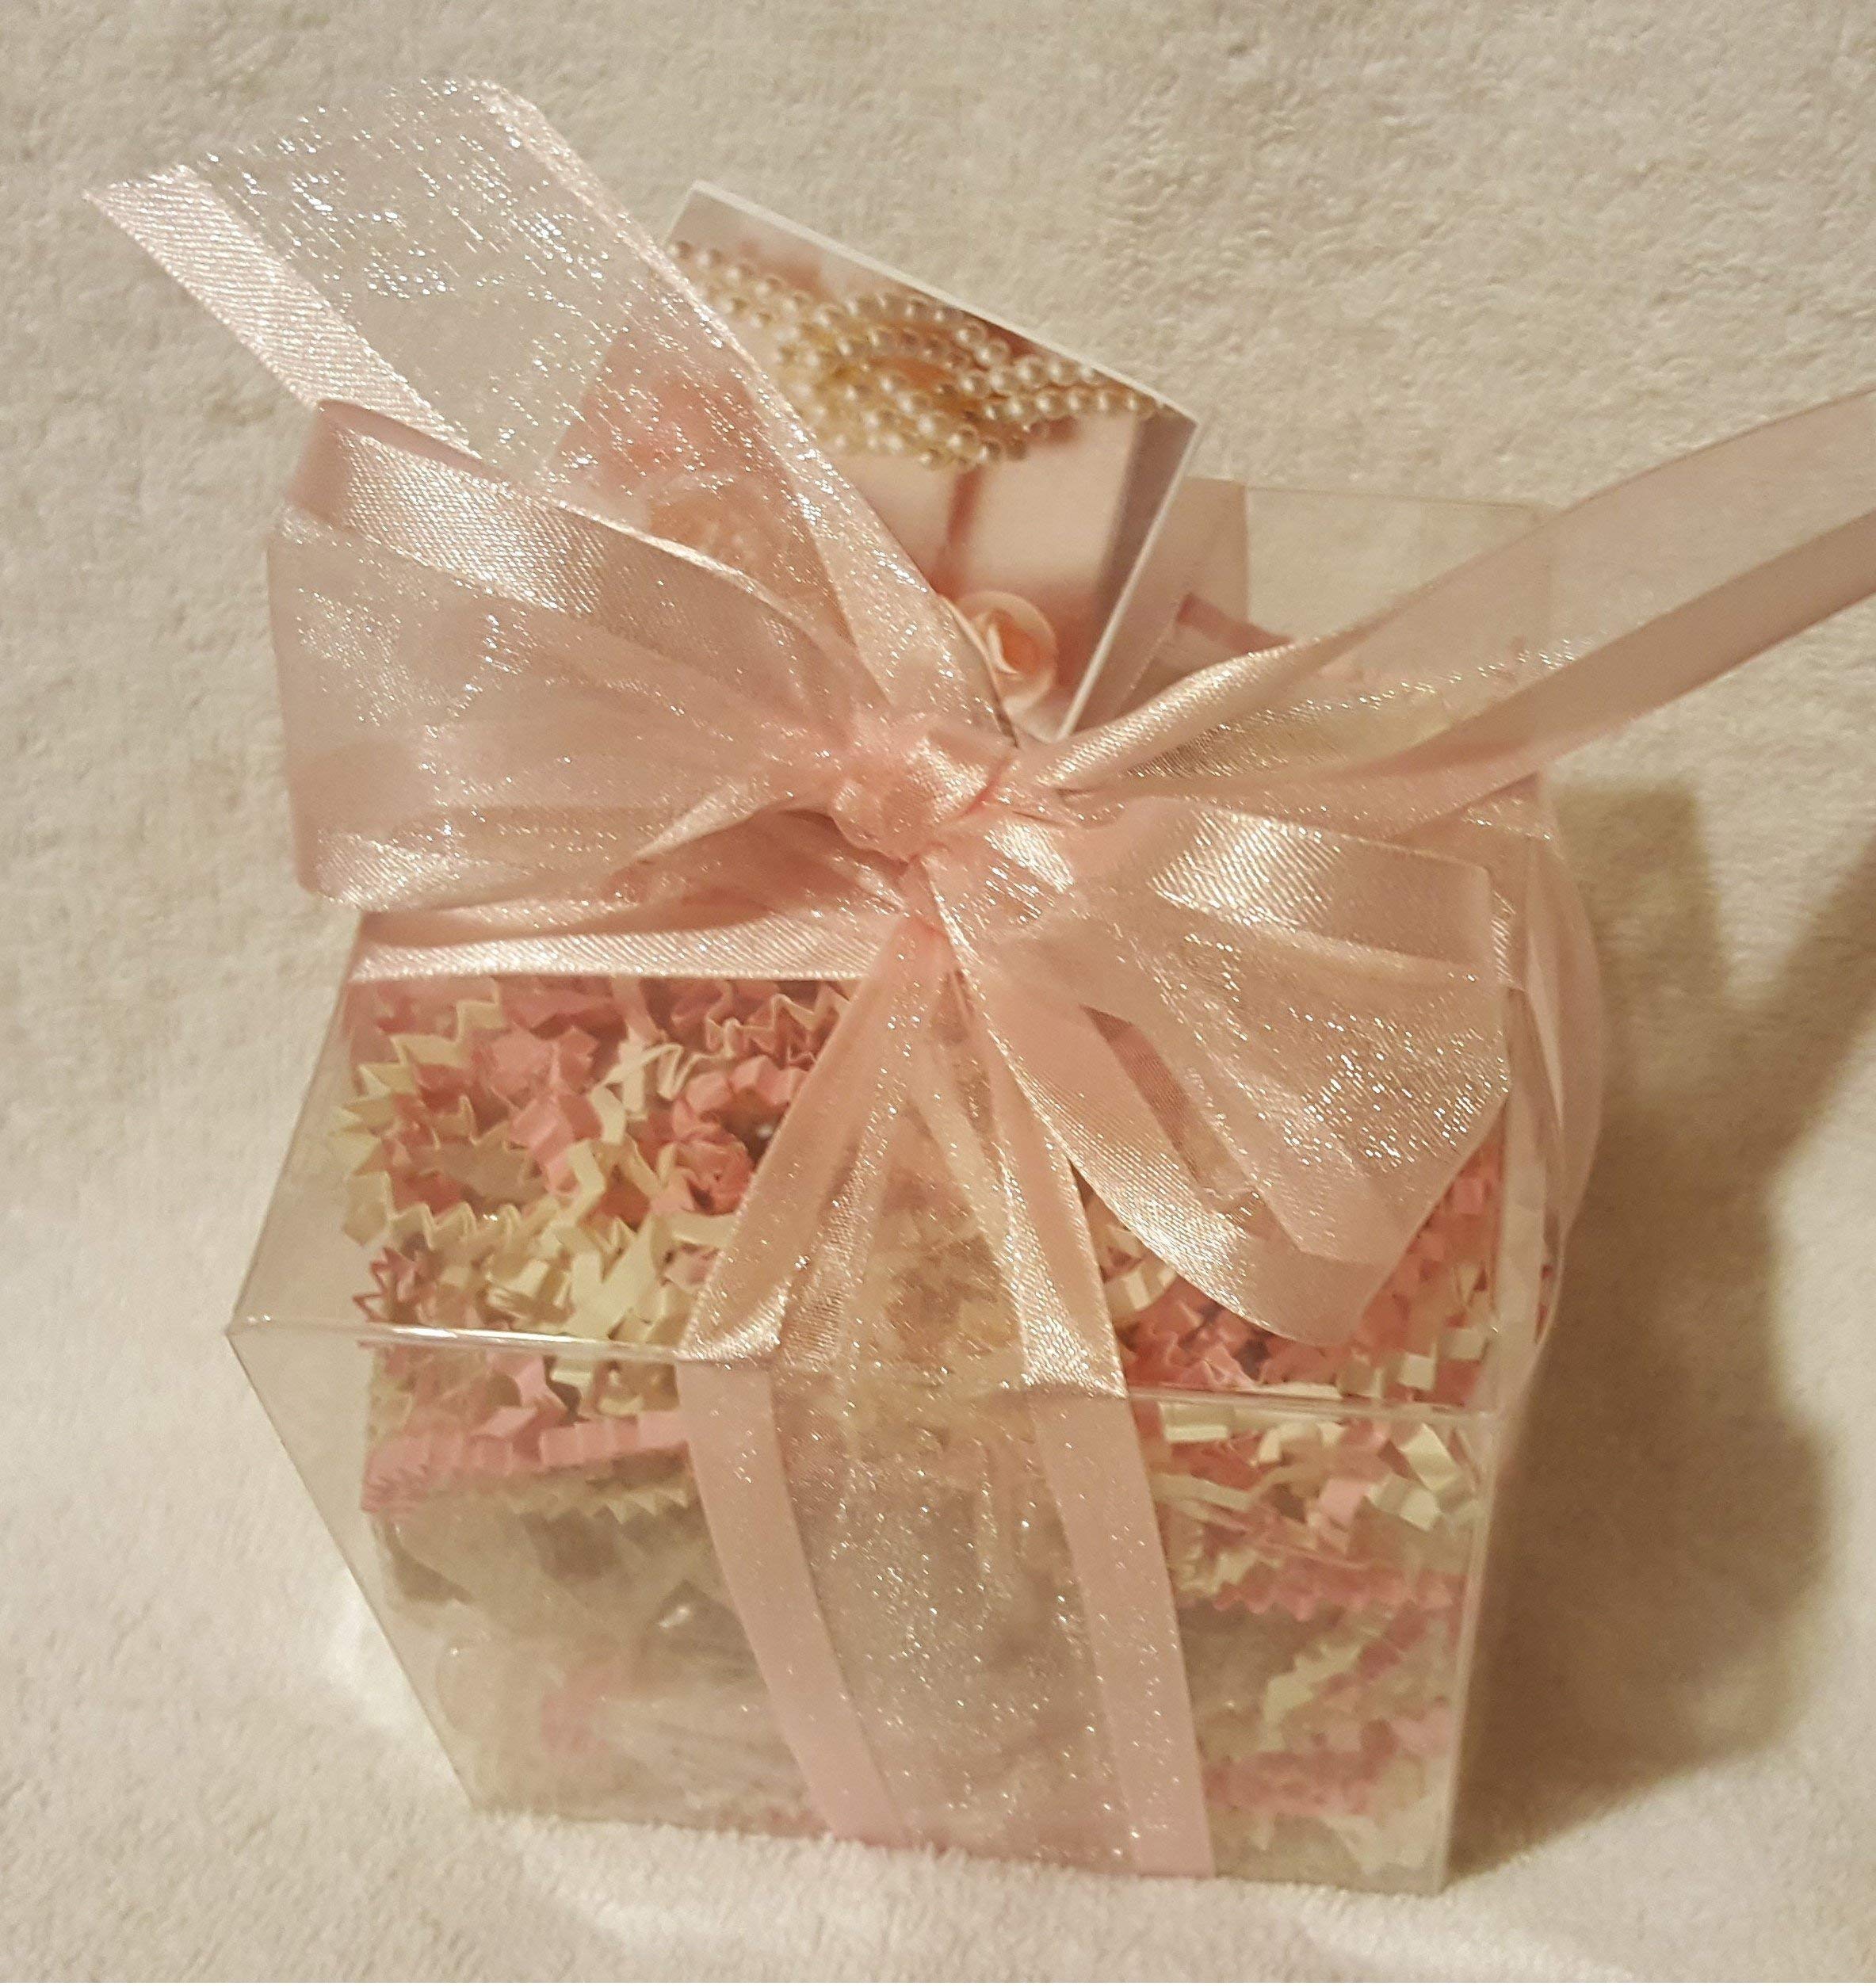 Spa Pure Vanilla Bath Bombs: Gift Set with 14 1 oz, ultra-moisturizing bath bombs, great for dry skin, makes a great gift